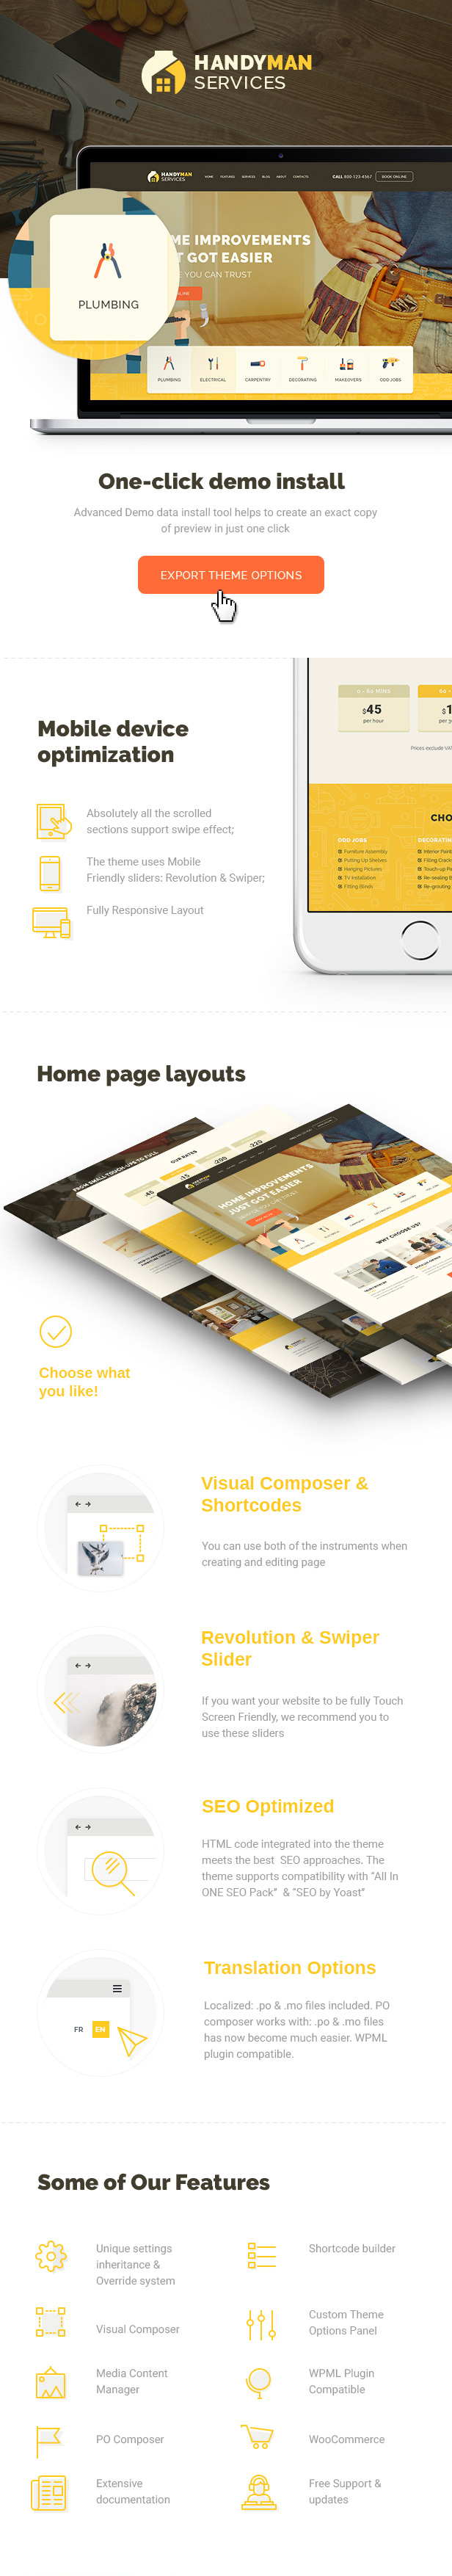 Handyman, Construction and Repair Services WordPress Theme features